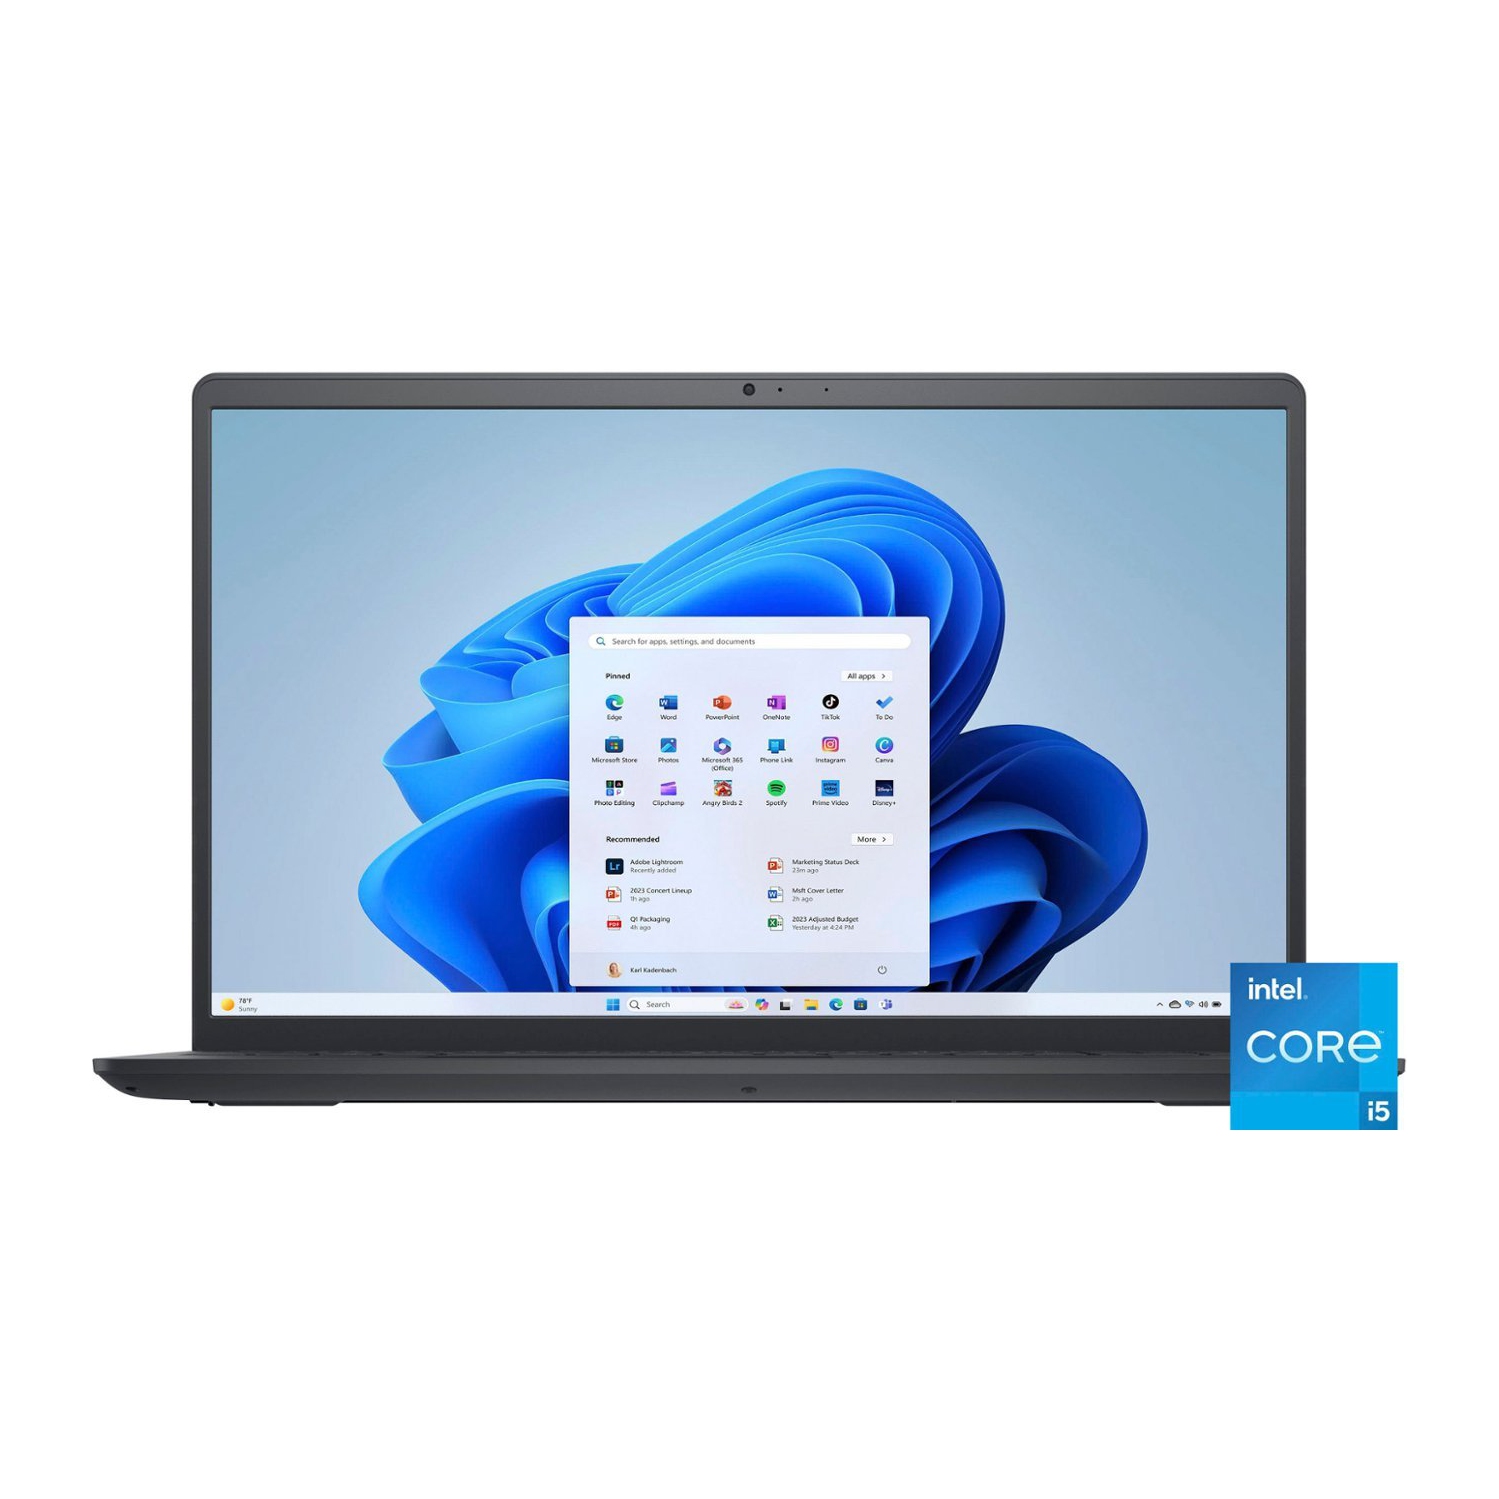 Dell - Inspiron 15.6" 3520 FHD 1920 x 1080 Touch Screen Laptop - Intel Core i5 - 1135G7 - 32GB Memory - 1TB SSD PCIE - Carbon Black - Windows 11 Home S mode, Wi-Fi, Bluetooth